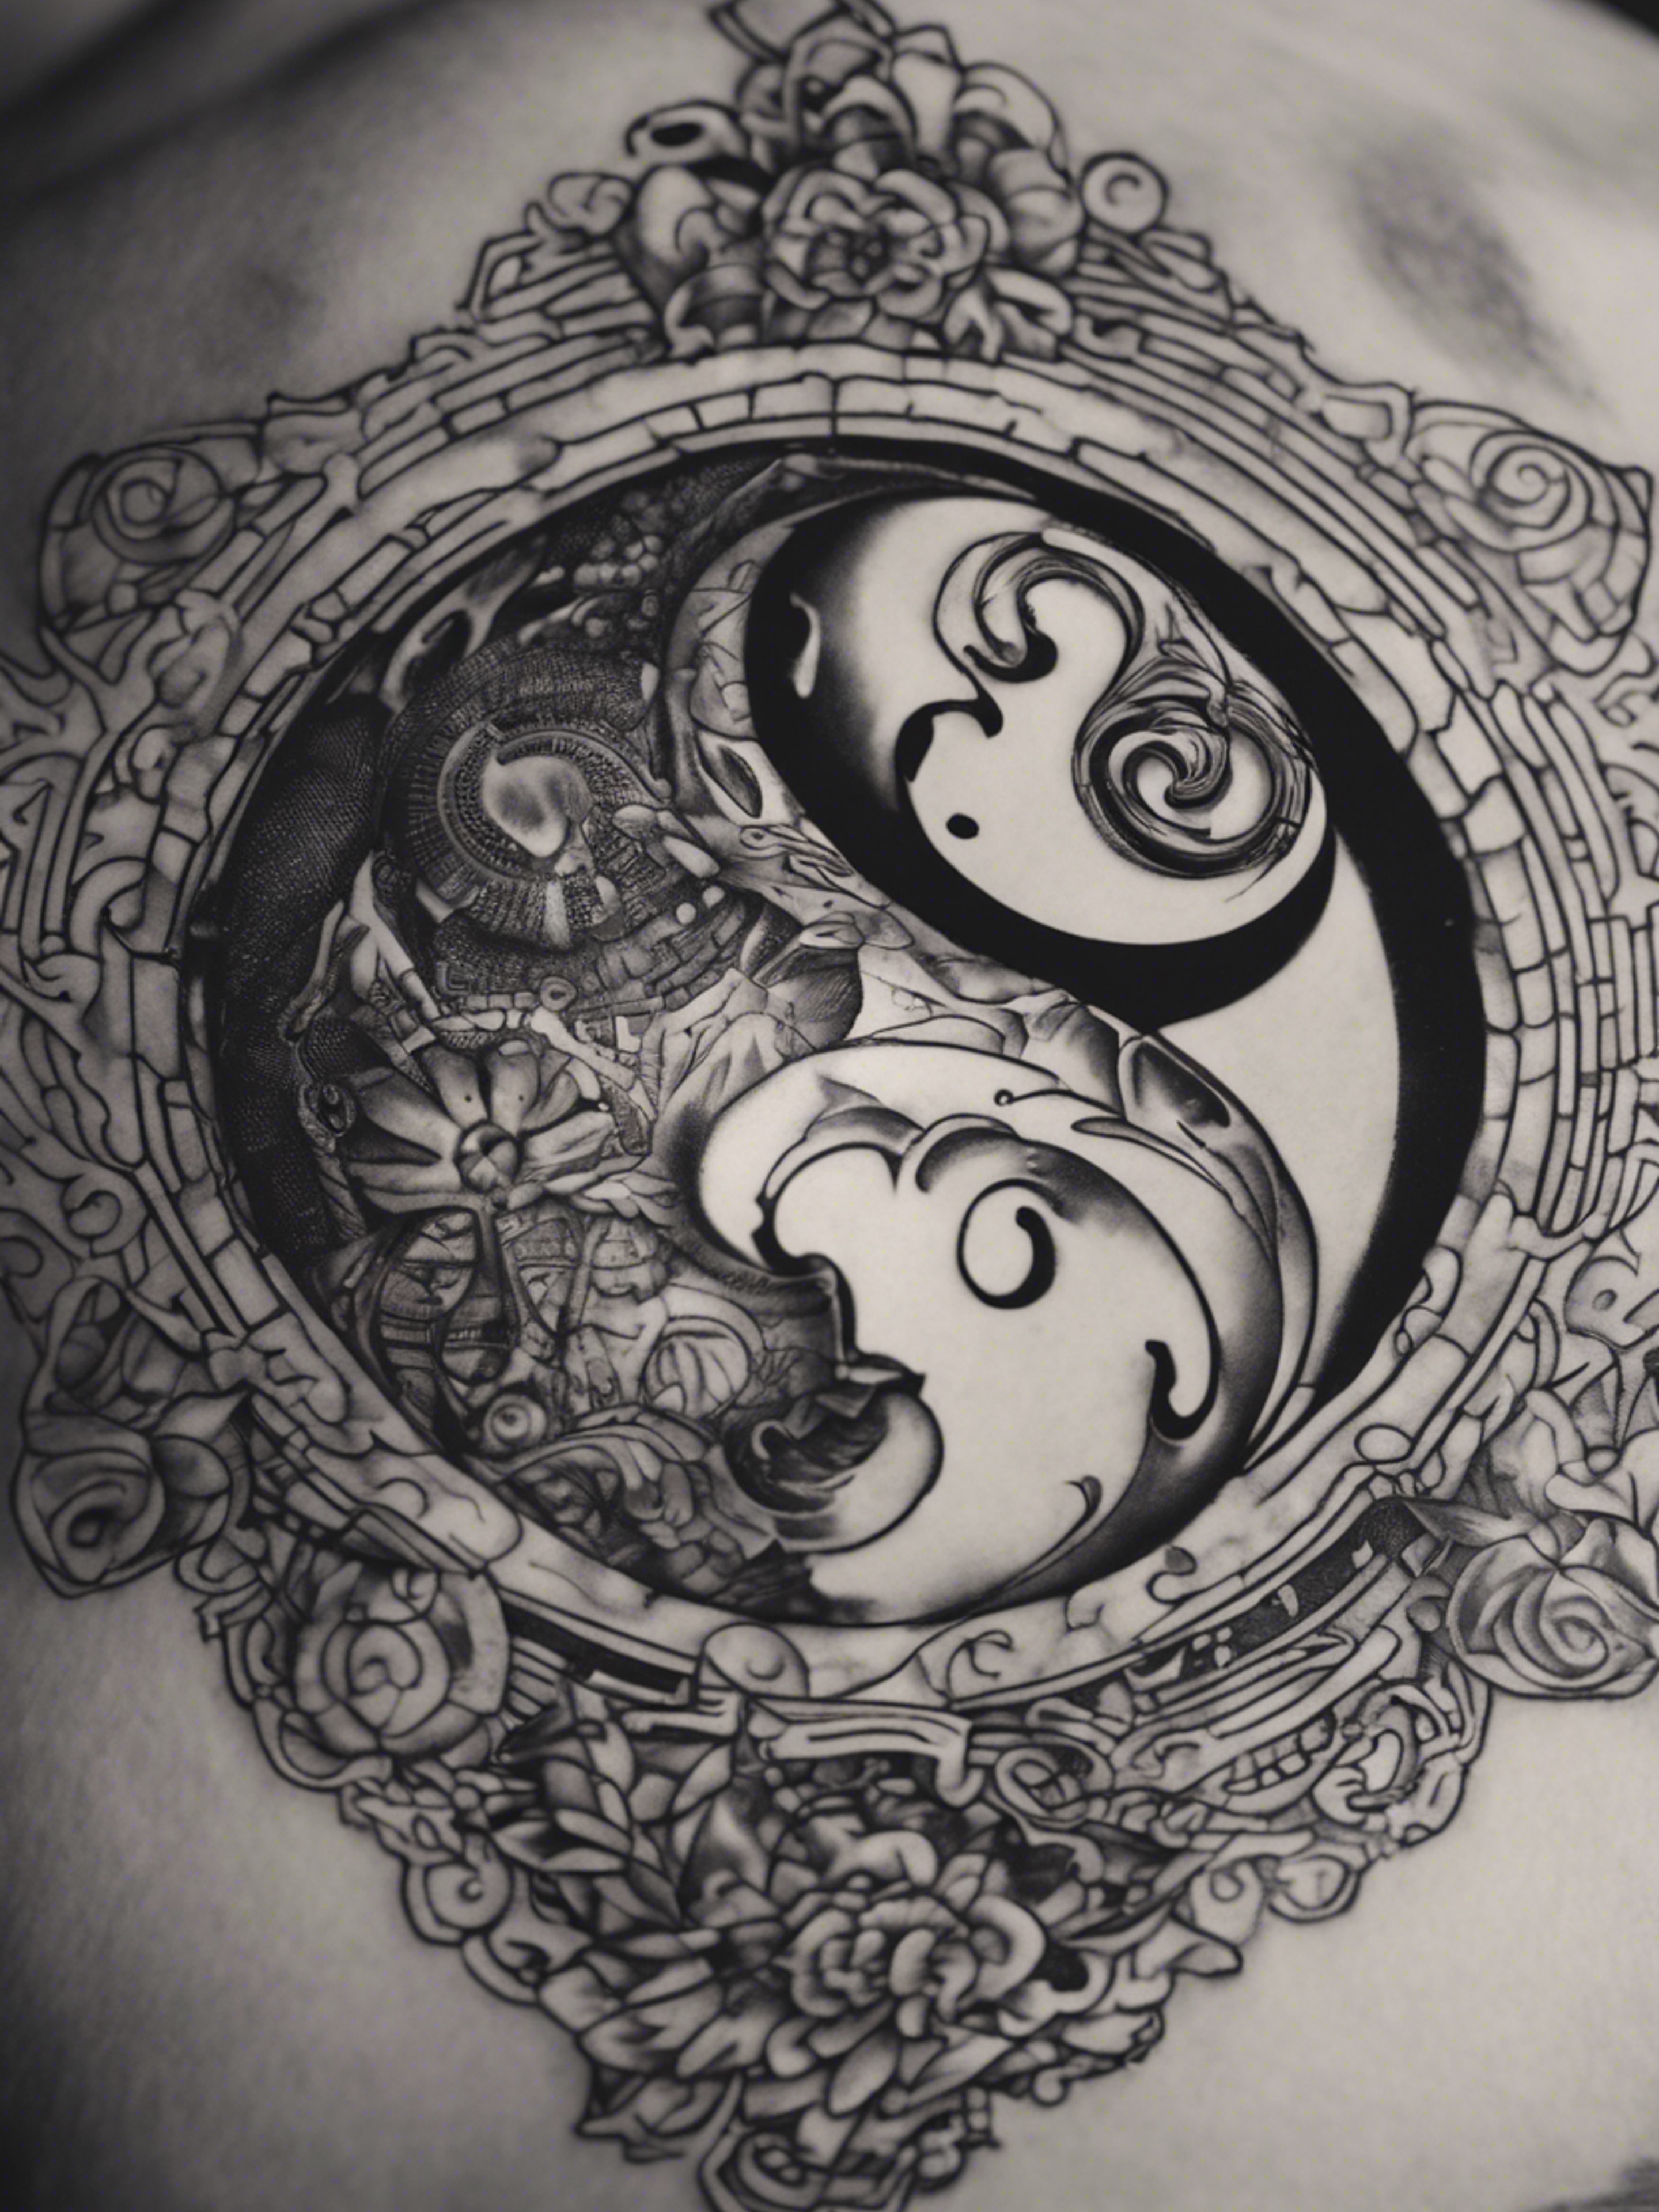 A black and gray tattoo demonstrating the sharp contrast of yin and yang. Hintergrund[cf6688009cd14e619f30]